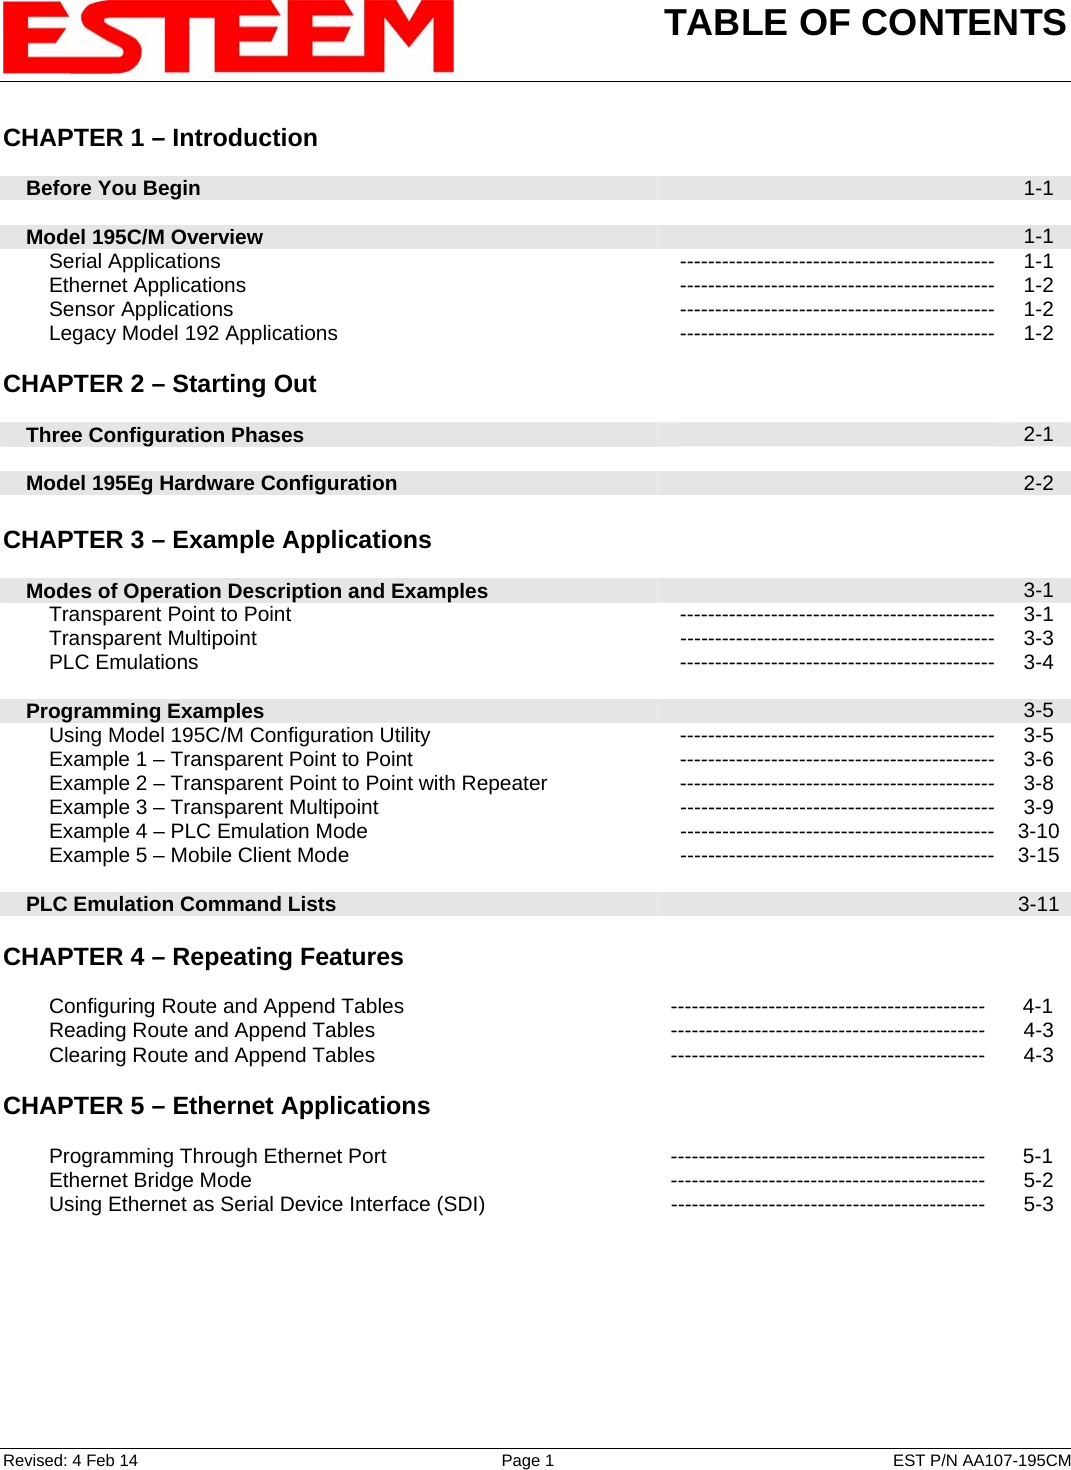 TABLE OF CONTENTS    Revised: 4 Feb 14  Page 1  EST P/N AA107-195CM CHAPTER 1 – Introduction      Before You Begin   1-1      Model 195C/M Overview   1-1         Serial Applications --------------------------------------------- 1-1         Ethernet Applications --------------------------------------------- 1-2         Sensor Applications --------------------------------------------- 1-2         Legacy Model 192 Applications --------------------------------------------- 1-2    CHAPTER 2 – Starting Out          Three Configuration Phases   2-1        Model 195Eg Hardware Configuration   2-2    CHAPTER 3 – Example Applications          Modes of Operation Description and Examples   3-1         Transparent Point to Point  --------------------------------------------- 3-1         Transparent Multipoint --------------------------------------------- 3-3         PLC Emulations --------------------------------------------- 3-4        Programming Examples   3-5         Using Model 195C/M Configuration Utility  --------------------------------------------- 3-5         Example 1 – Transparent Point to Point  --------------------------------------------- 3-6         Example 2 – Transparent Point to Point with Repeater --------------------------------------------- 3-8         Example 3 – Transparent Multipoint --------------------------------------------- 3-9         Example 4 – PLC Emulation Mode  --------------------------------------------- 3-10         Example 5 – Mobile Client Mode  --------------------------------------------- 3-15       PLC Emulation Command Lists   3-11   CHAPTER 4 – Repeating Features             Configuring Route and Append Tables ---------------------------------------------  4-1         Reading Route and Append Tables --------------------------------------------- 4-3         Clearing Route and Append Tables --------------------------------------------- 4-3    CHAPTER 5 – Ethernet Applications              Programming Through Ethernet Port ---------------------------------------------  5-1         Ethernet Bridge Mode --------------------------------------------- 5-2         Using Ethernet as Serial Device Interface (SDI)  ---------------------------------------------  5-3   